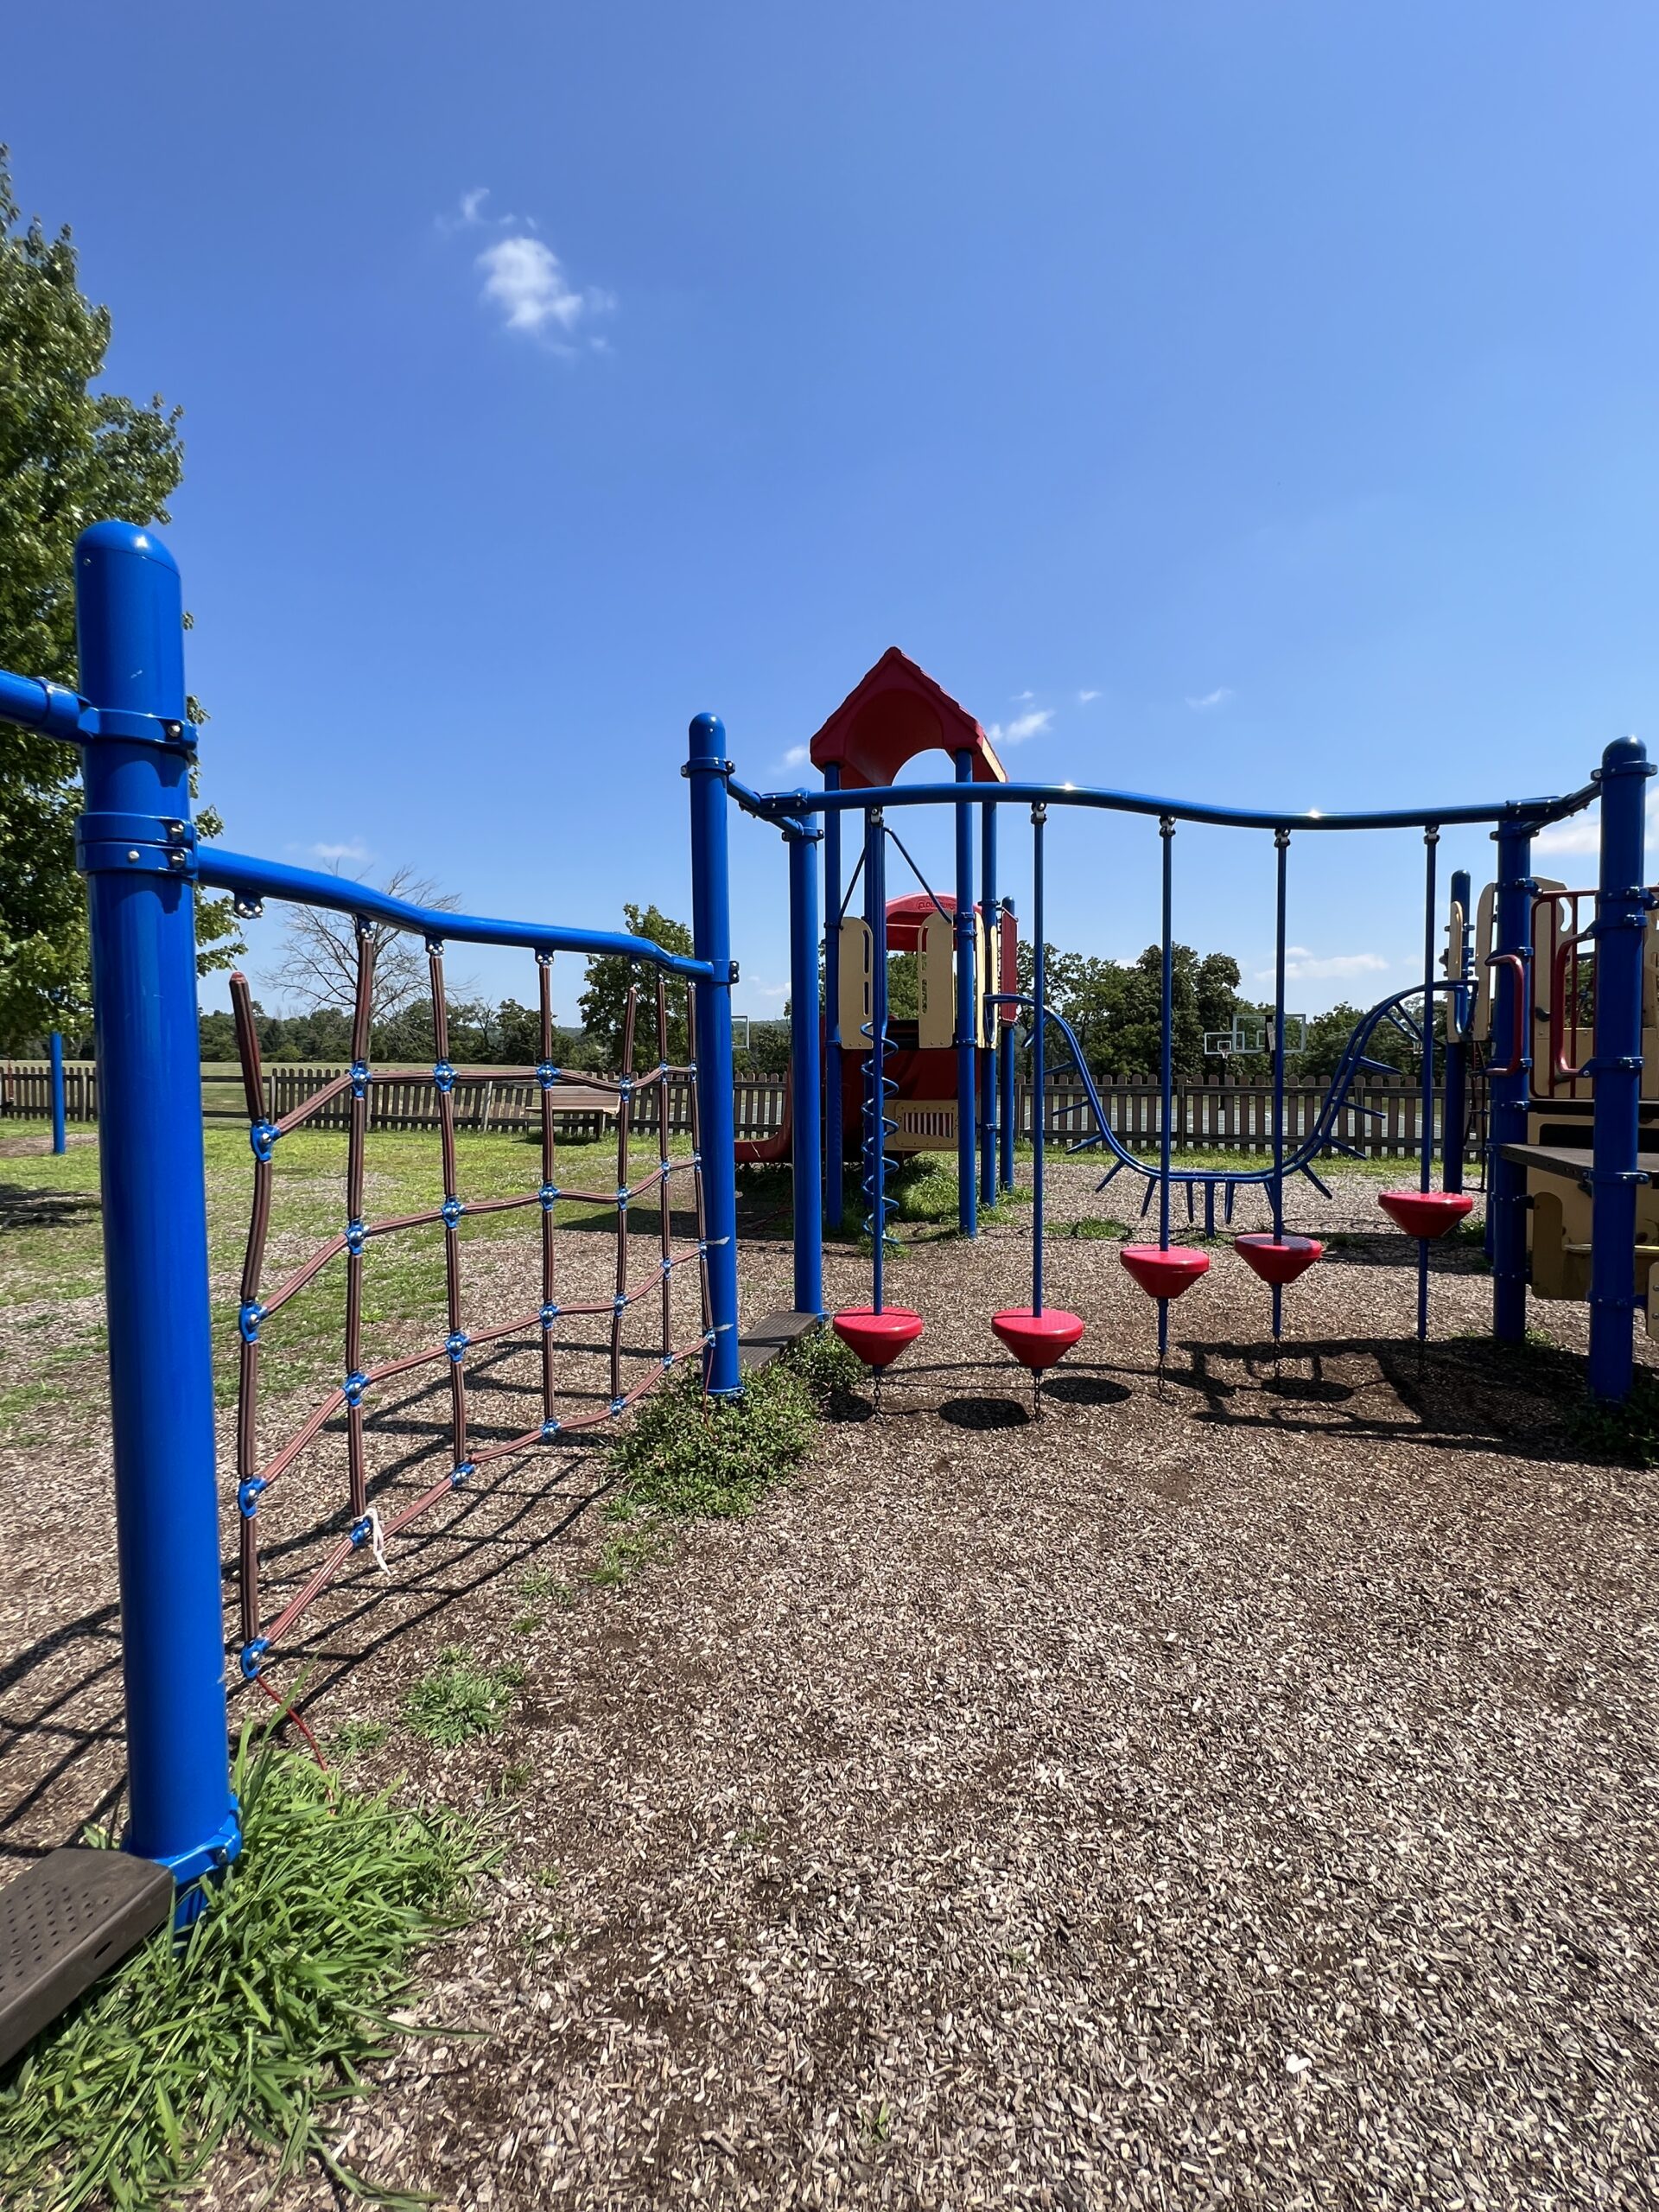 Alexandria Township Park Playground in Milford NJ - Features - climbing features